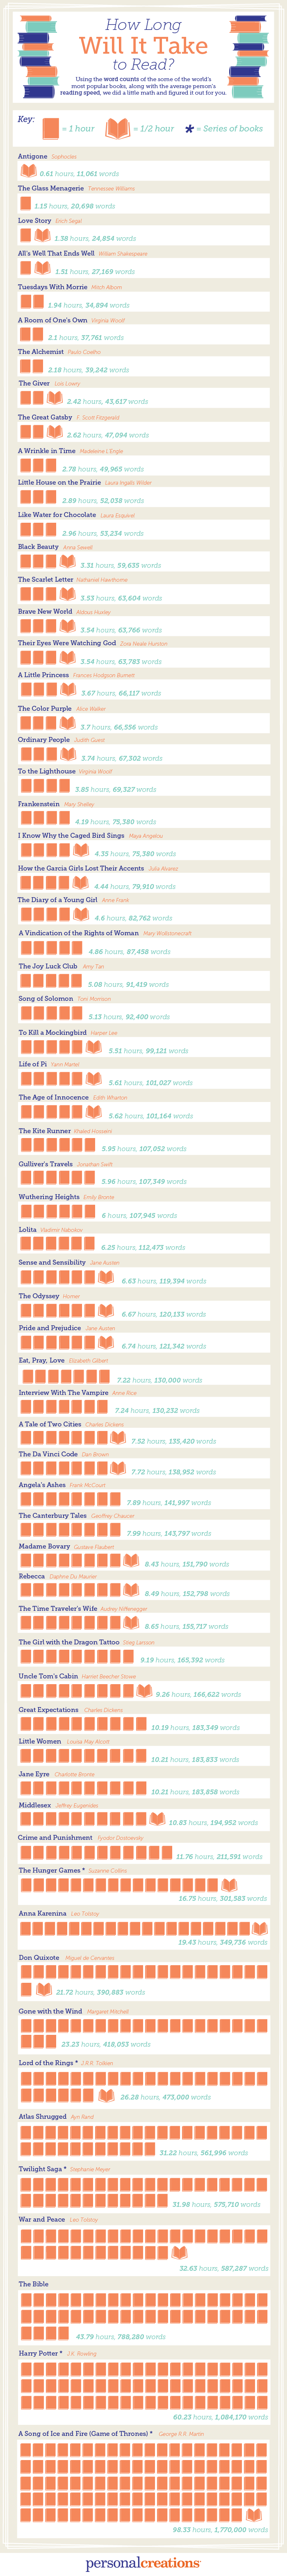 Infographic: How Long Should It Take You To Read Famous Works Of Literature? | The Freelancer, By Contently